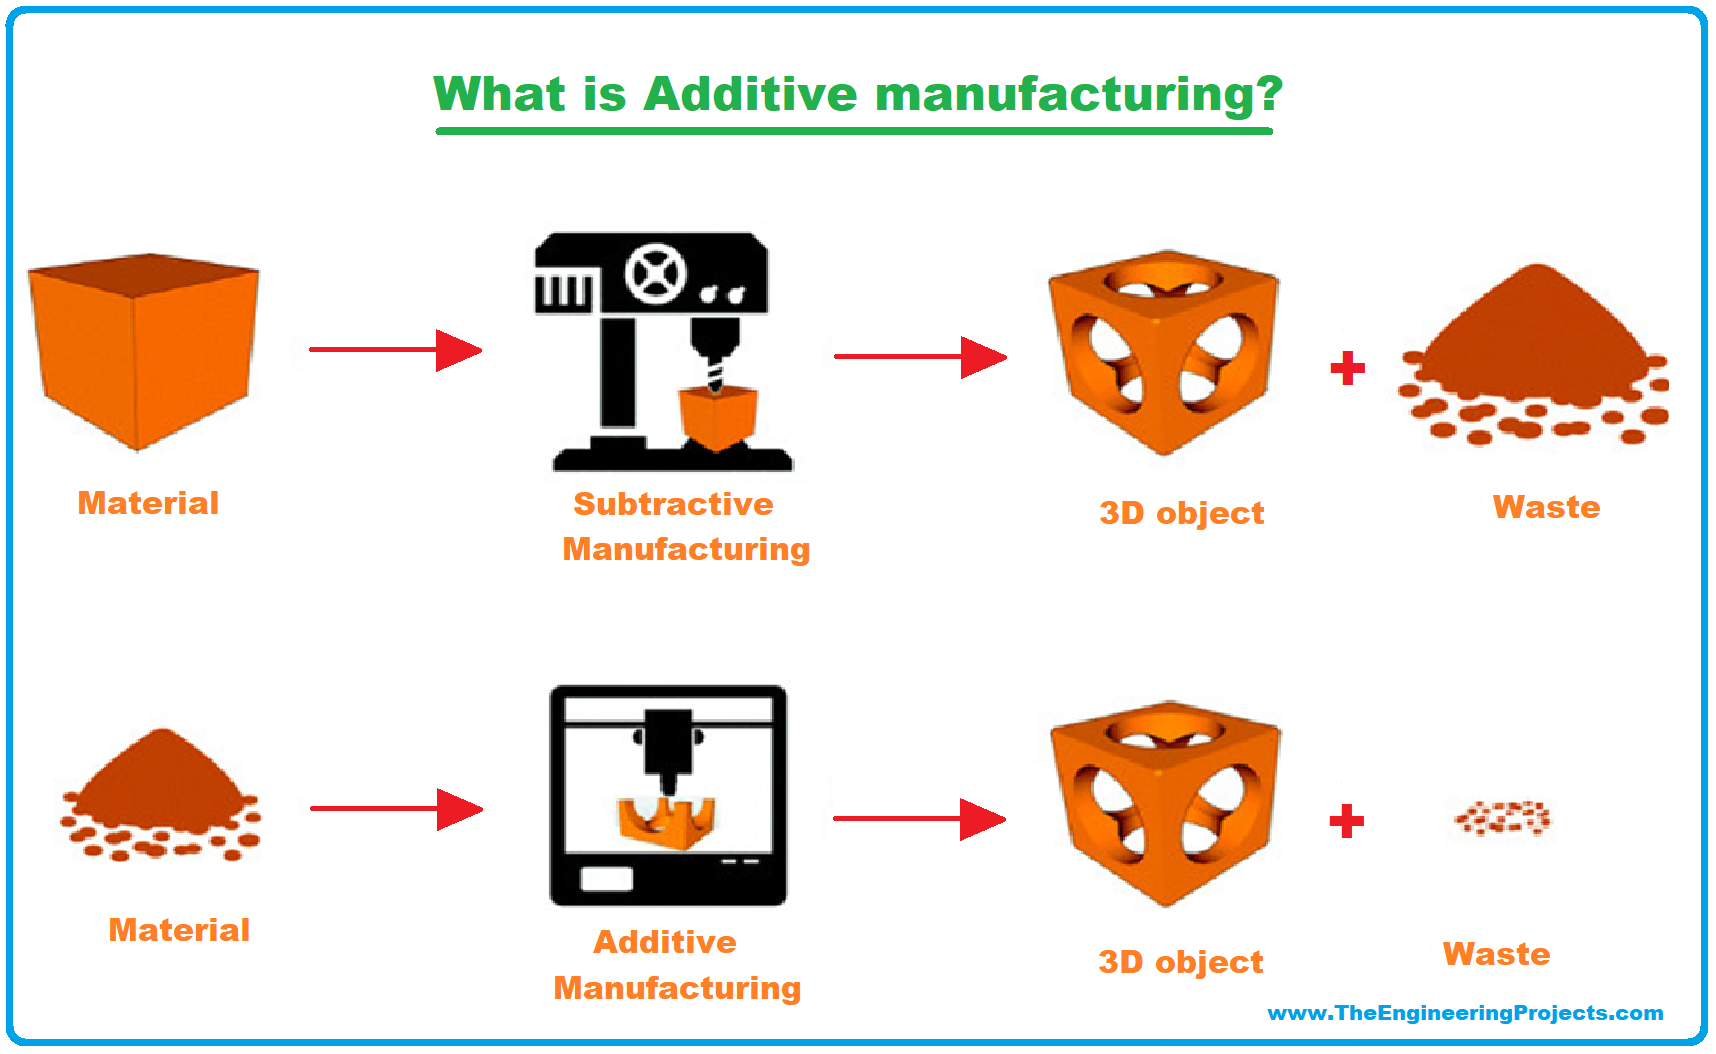 3D Printing, 3D Printer, 3D Printing definition, What is 3D Printing, Definition of 3D printing, 3D Printing Technology, Process of 3D printing, Applications of 3D Printing, 3D Printing examples, 3D Printing advantages, additive manufacturing